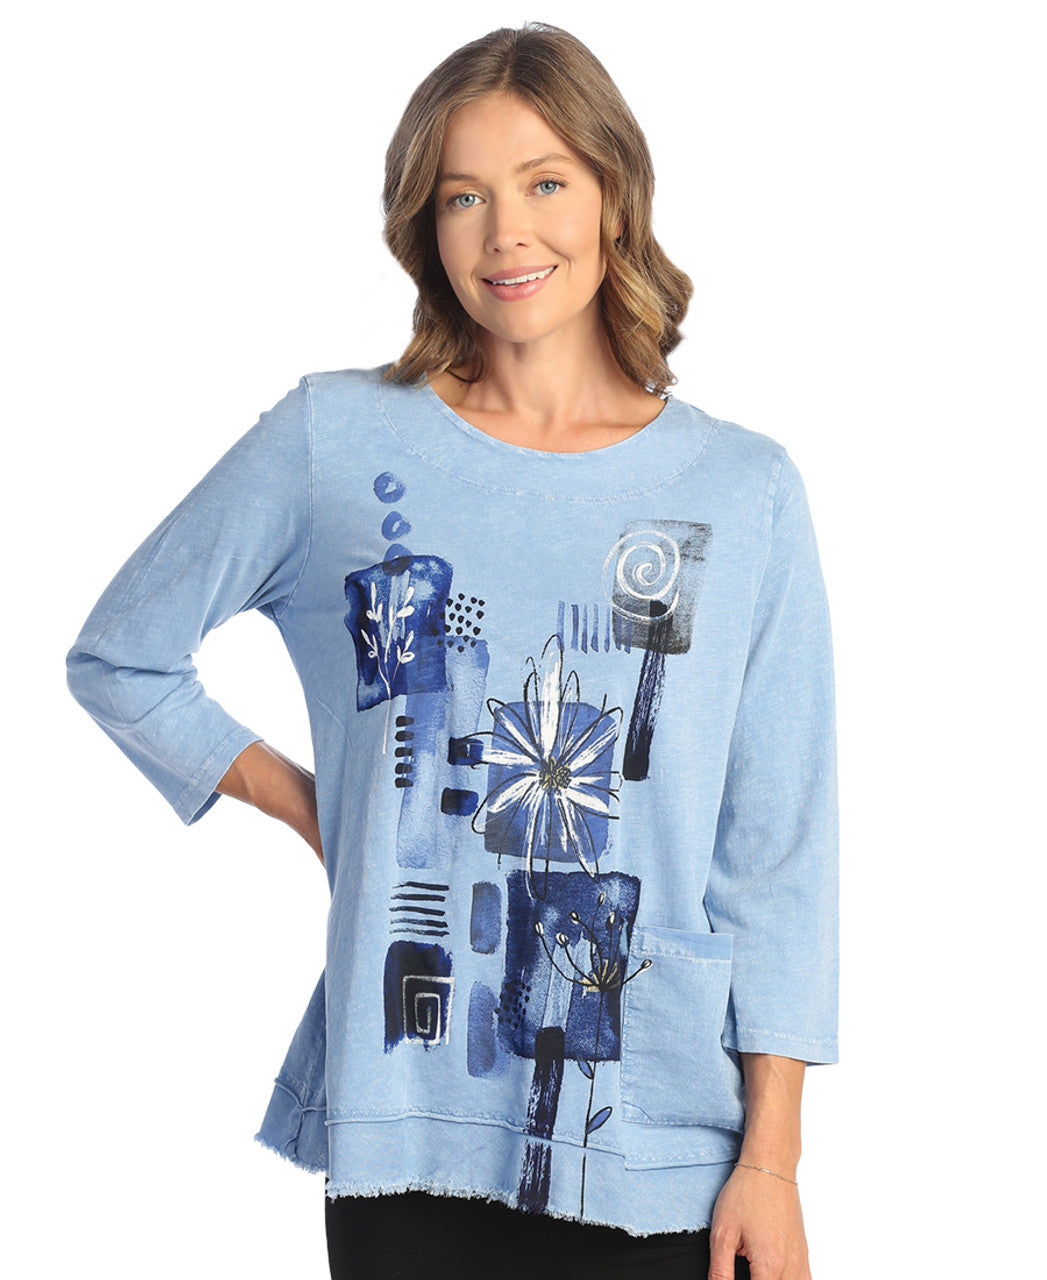 Lily Mineral Tunic Top w/ Pocket